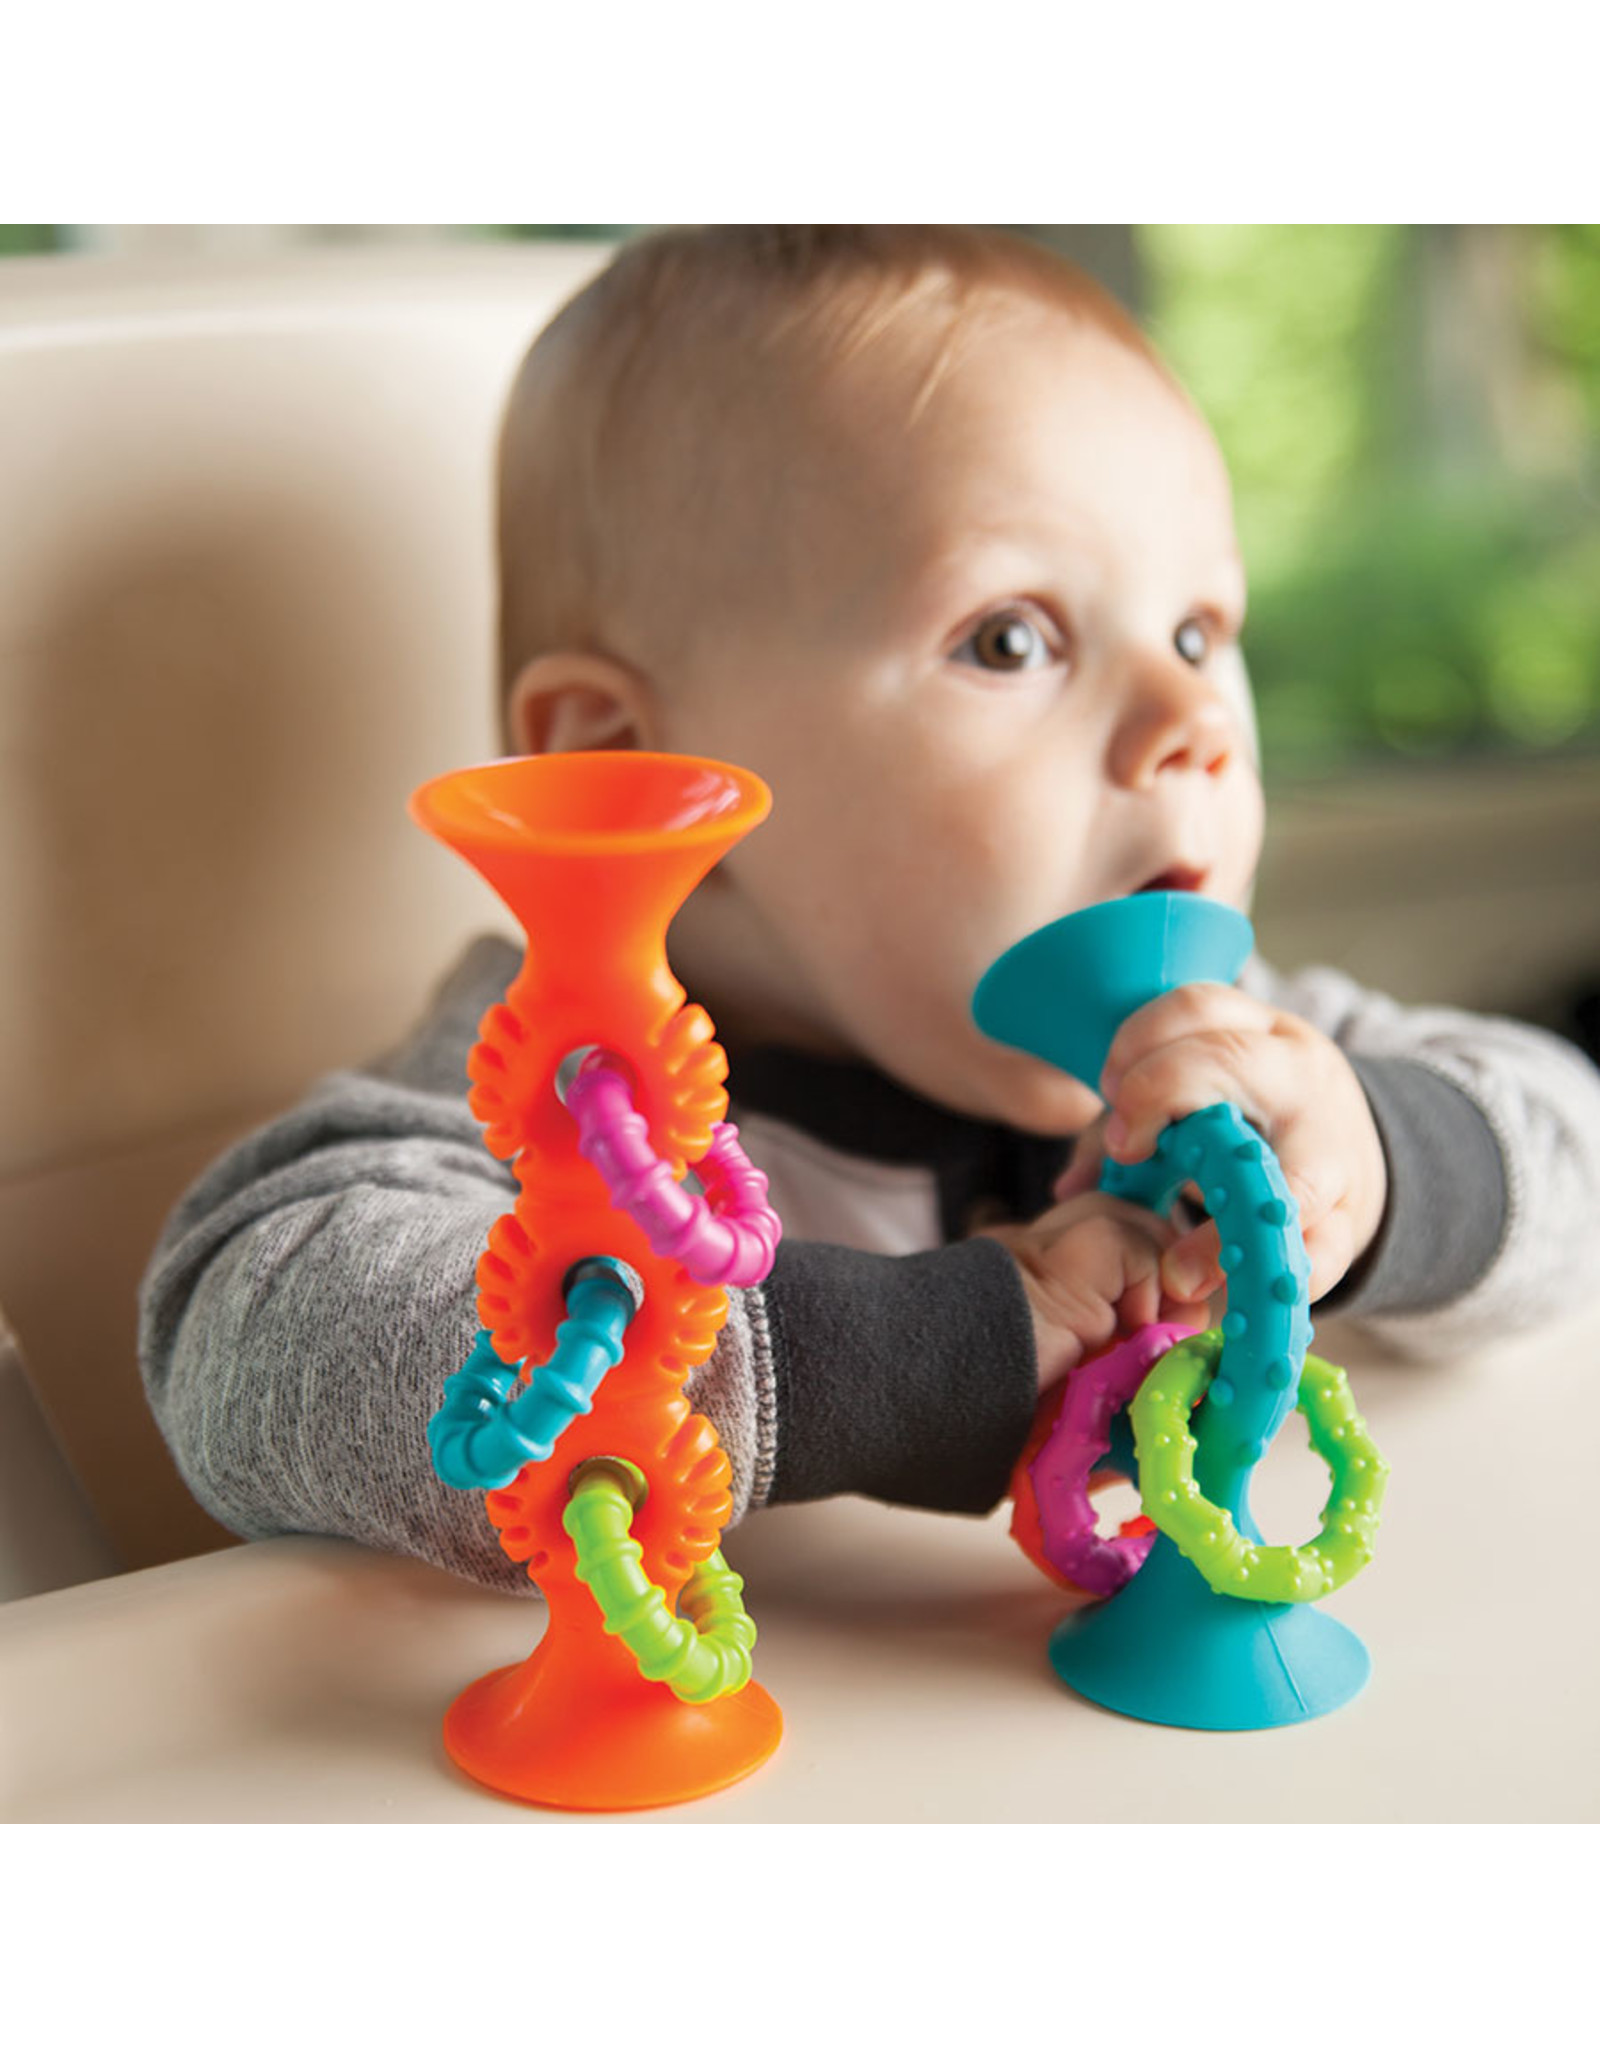 Fat Brain Toys pipSquigz Loops - Teal